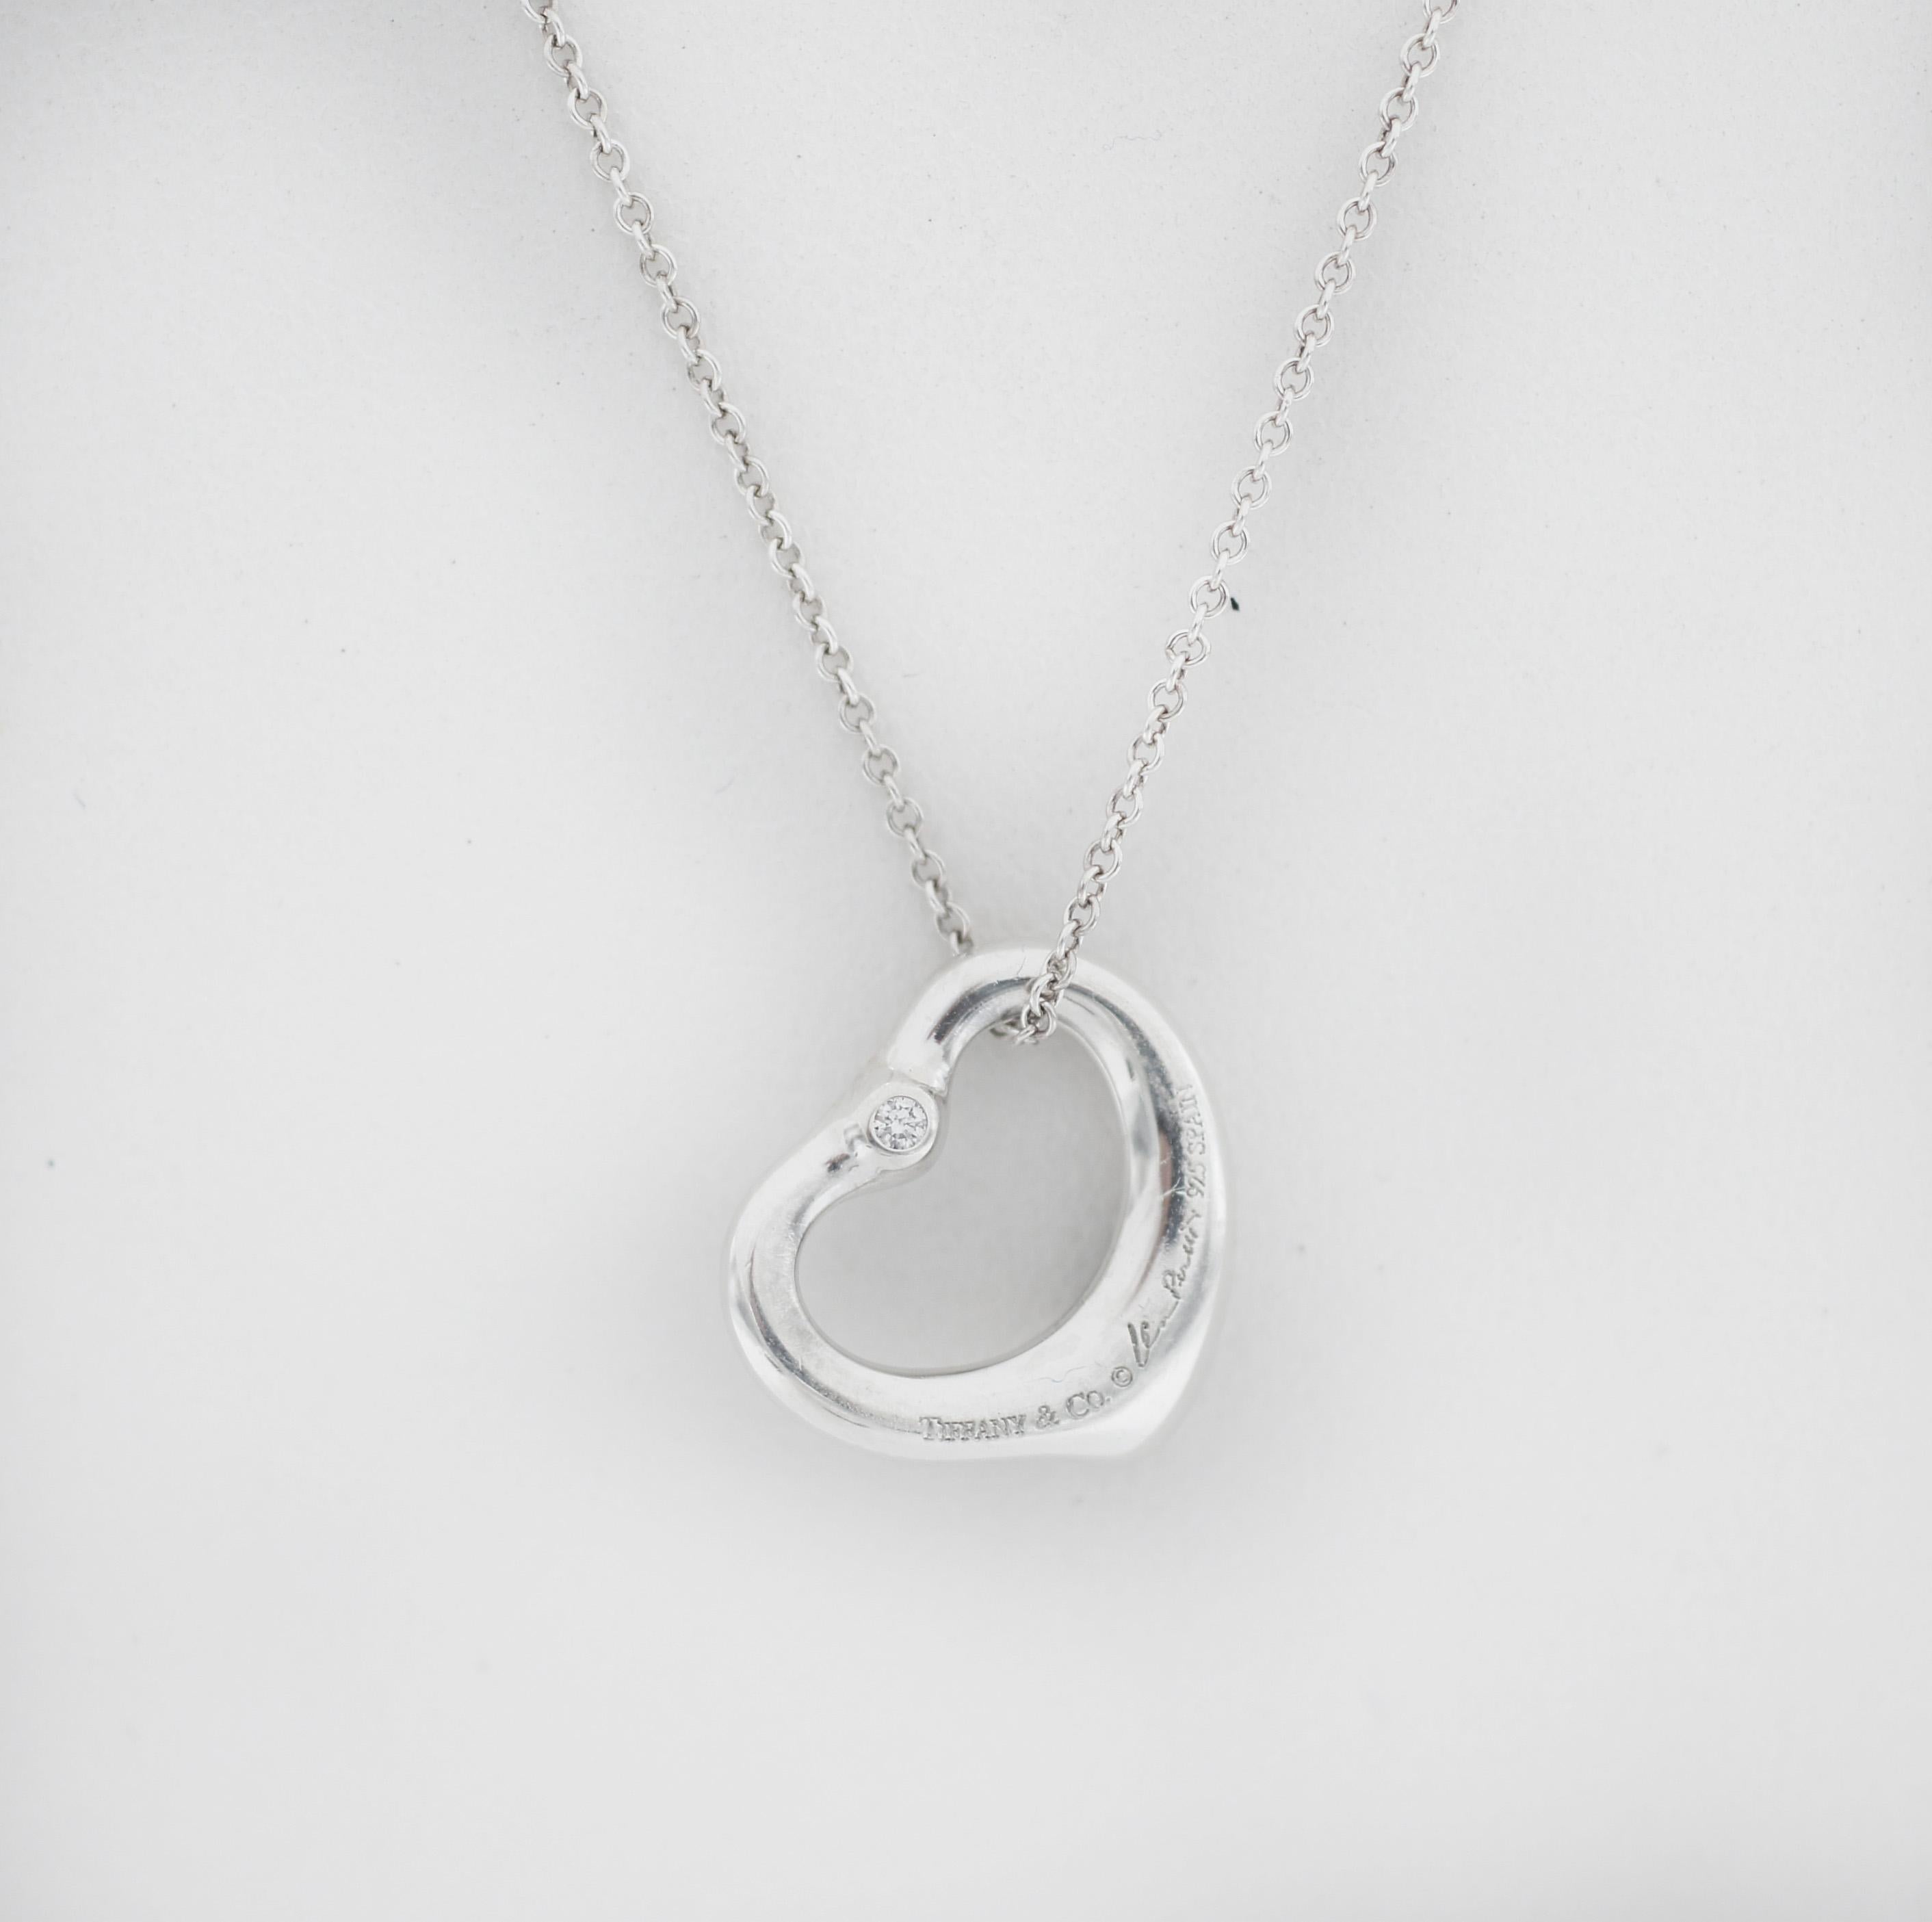 Tiffany & Co.
Elsa Peretti
Open Heart Pendant
Description & Details:
The simple, evocative shape of Elsa Peretti Open Heart designs celebrates the spirit of love. This elegant style is one of her most celebrated icons.
925 Sterling silver
Heart size